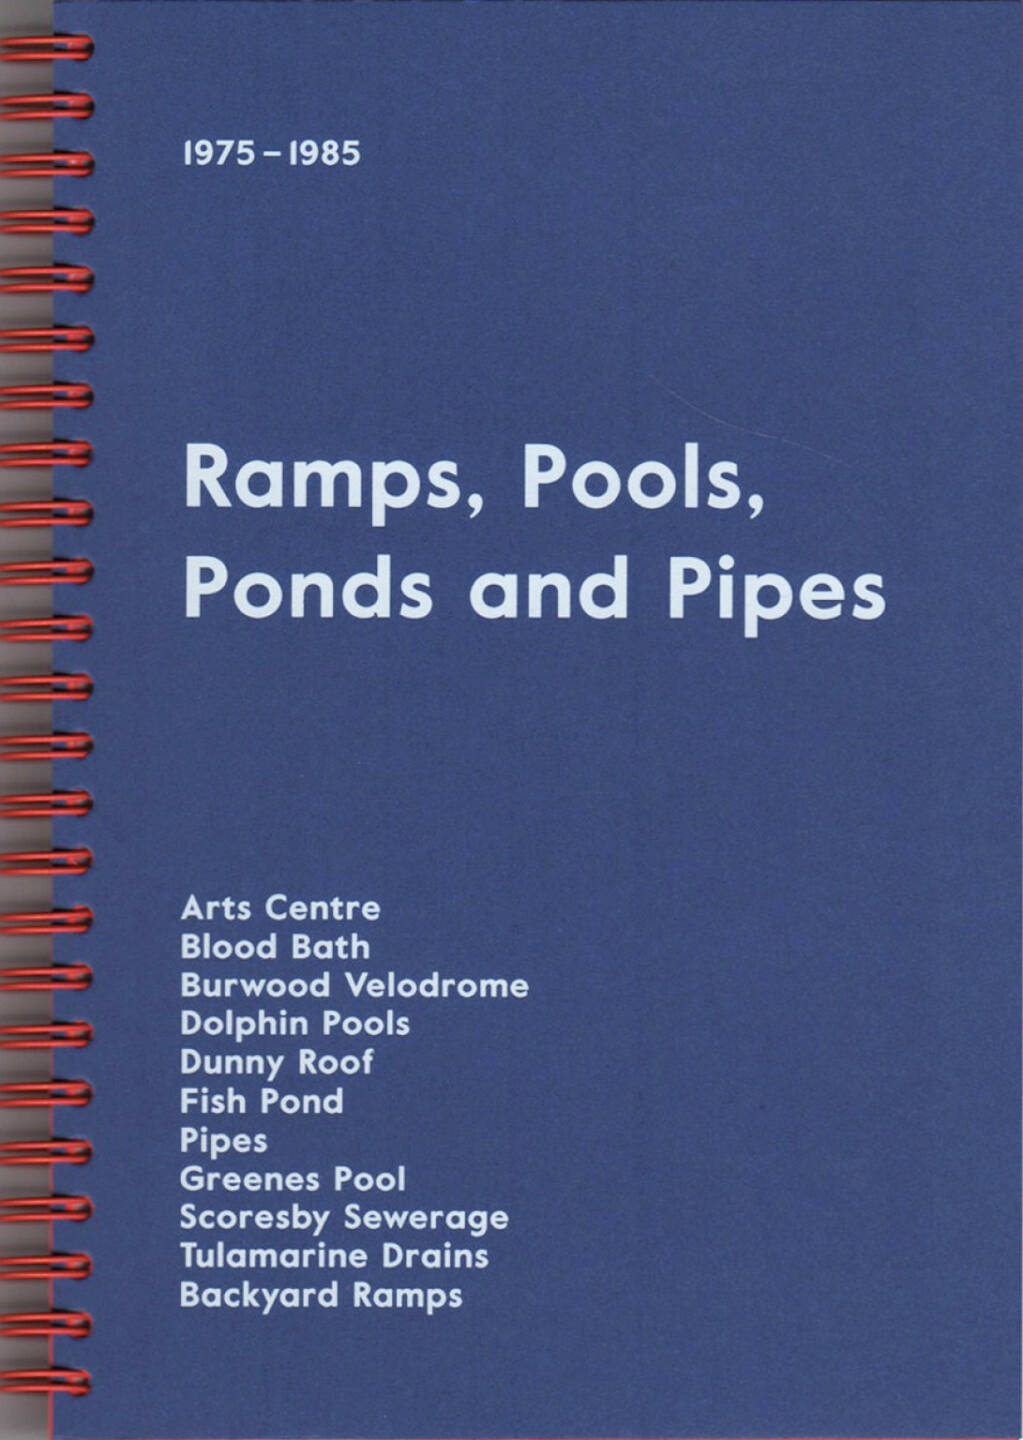 Dom Forde - Ramps, Pools, Ponds and Pipes, Self published 2015, Cover - http://josefchladek.com/book/dom_forde_-_ramps_pools_ponds_and_pipes